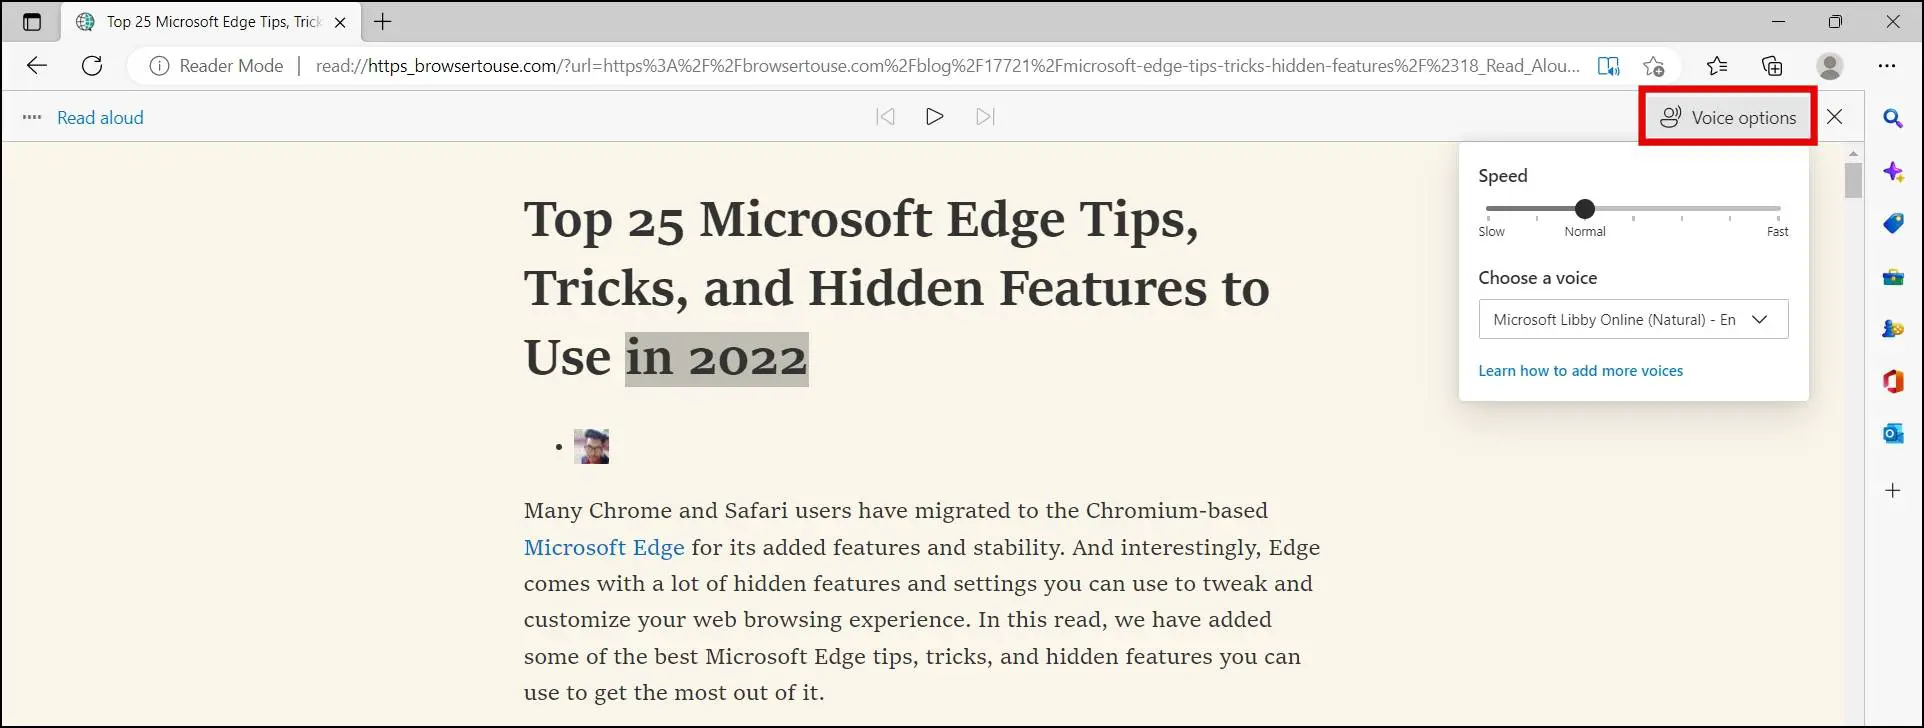 Enable Reading Mode in Microsoft Edge